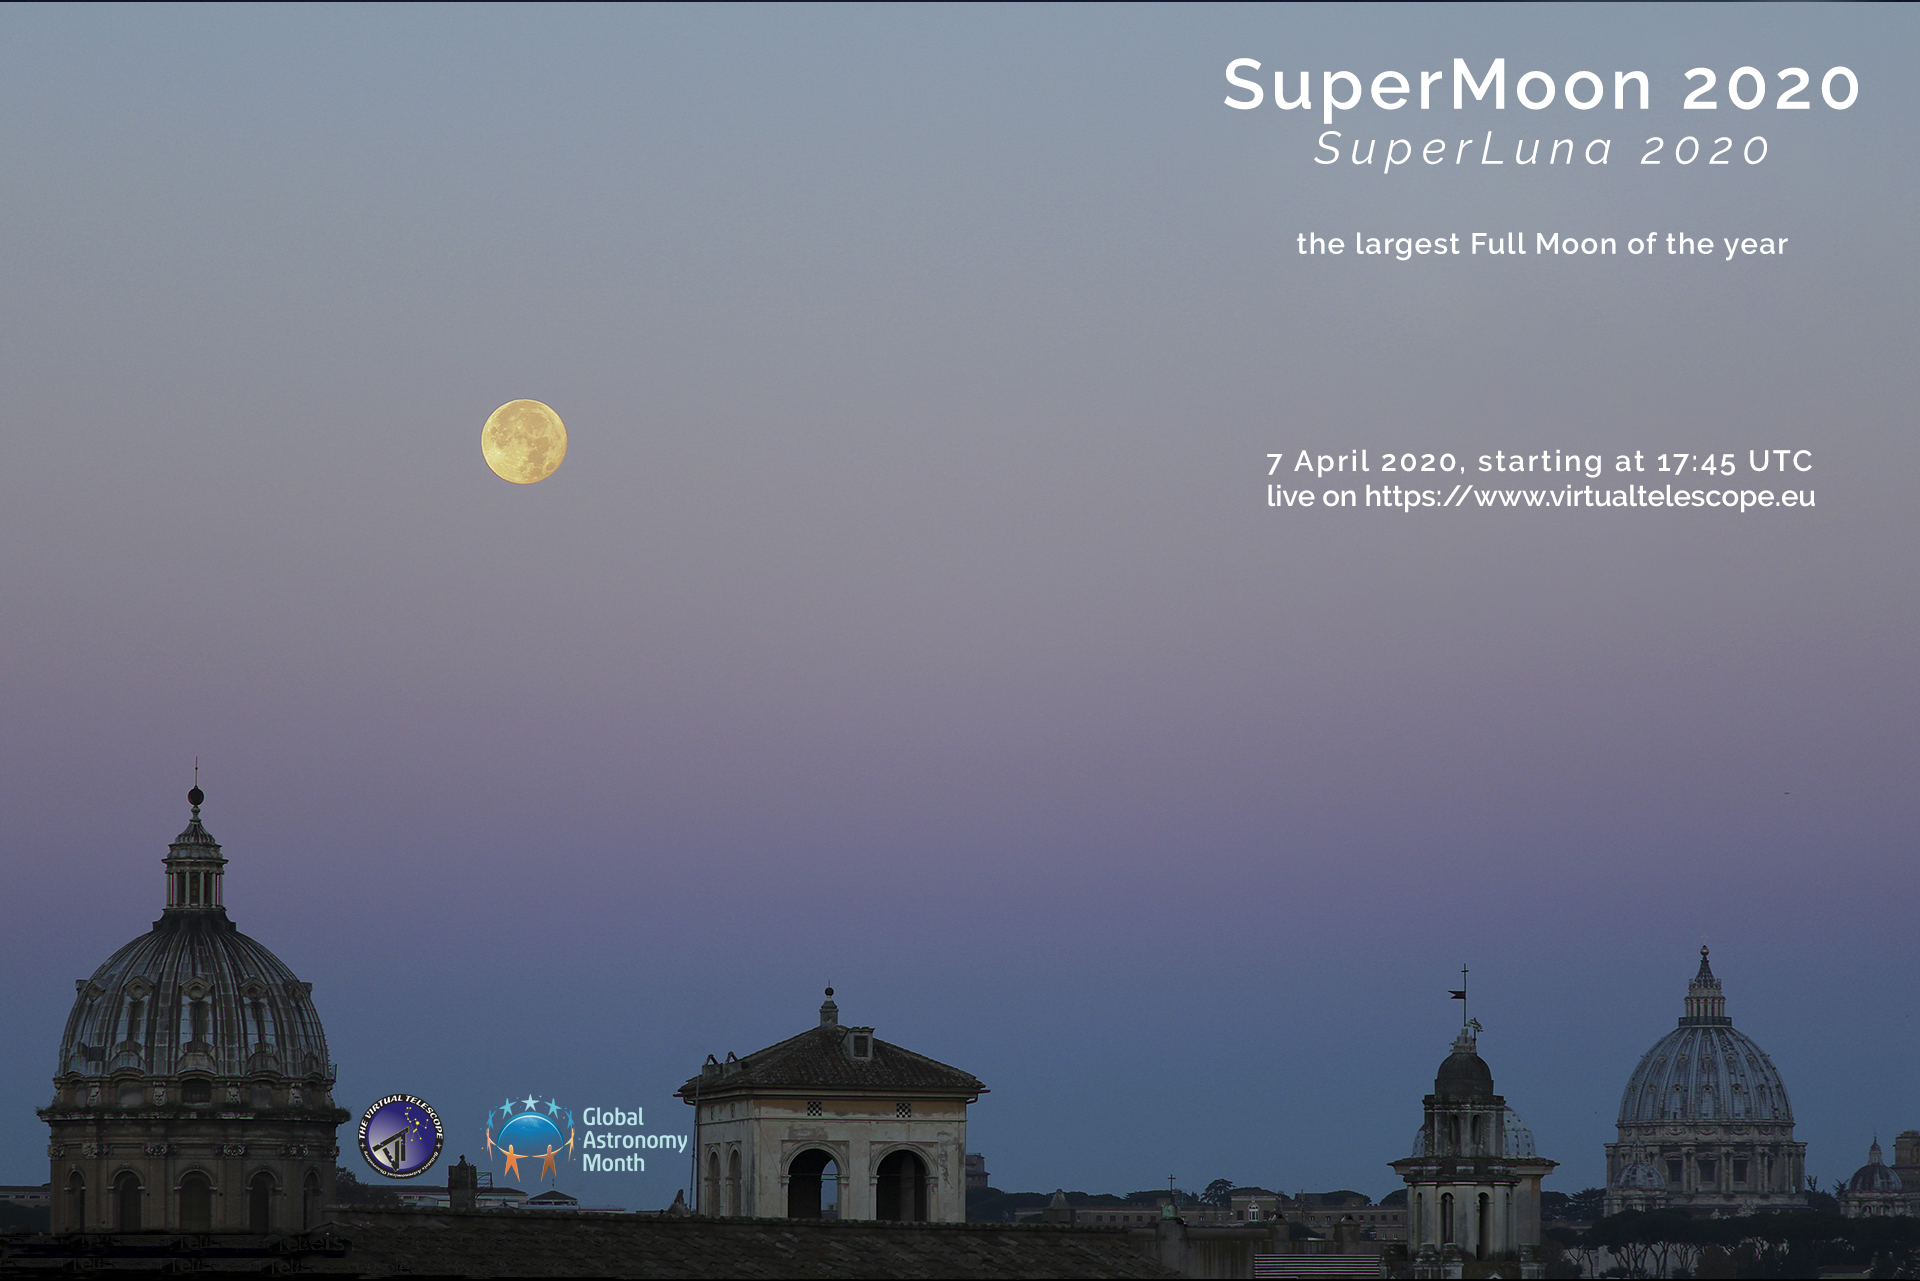 "SuperMoon 2020": poster of the event